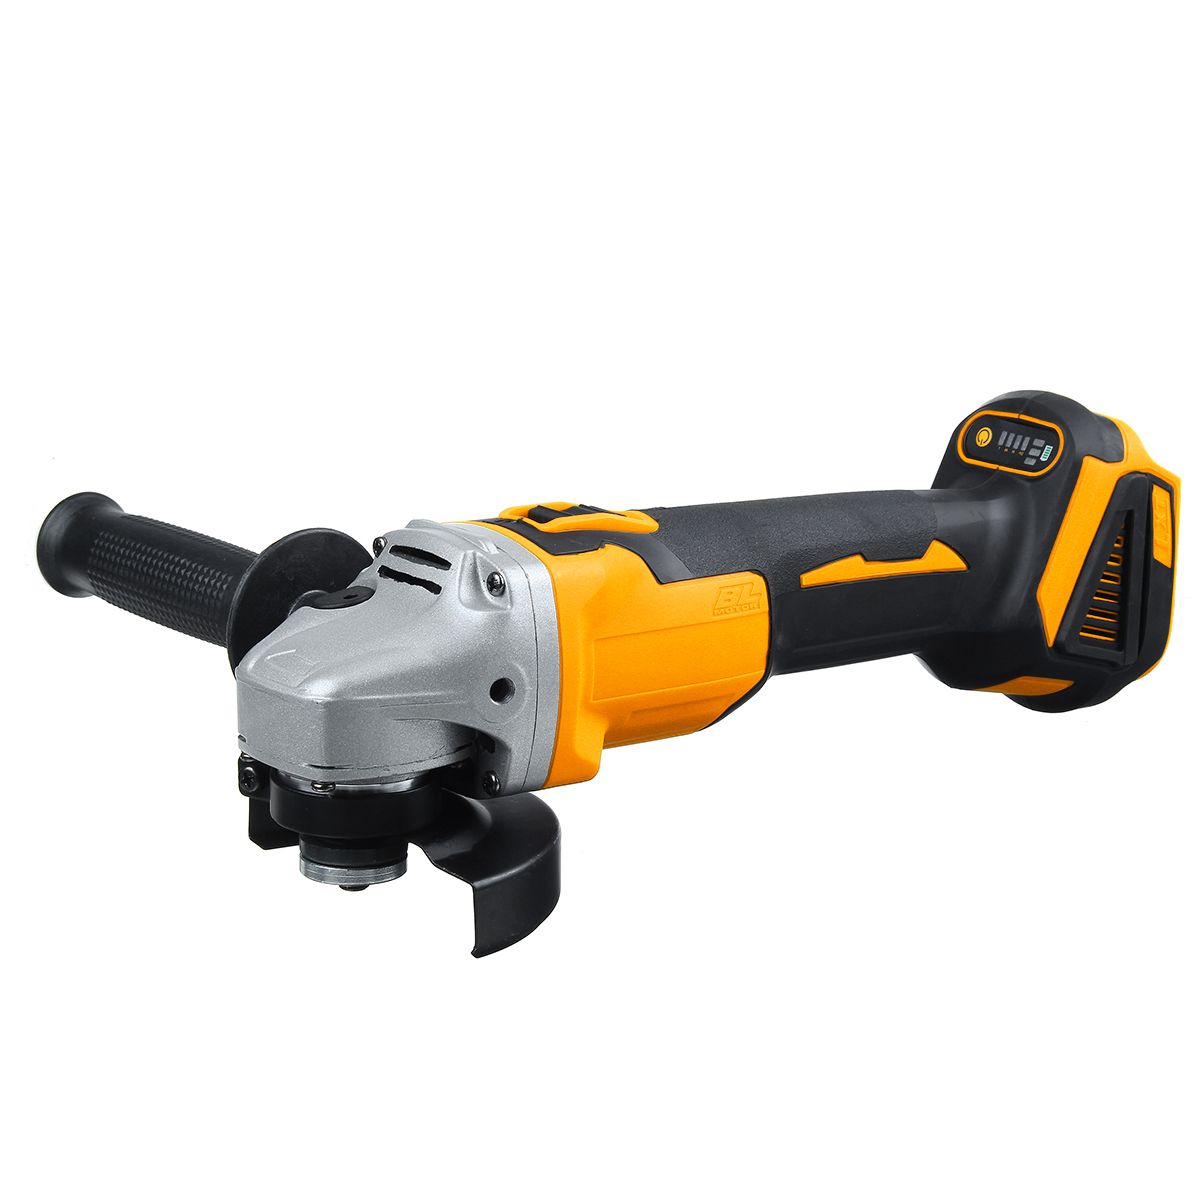 860W-4-Speeds-Brushless-Electric-Angle-Grinder-11000rpm-Heavy-Duty-Cutting-Grinding-Tool-For-Makita--1740227